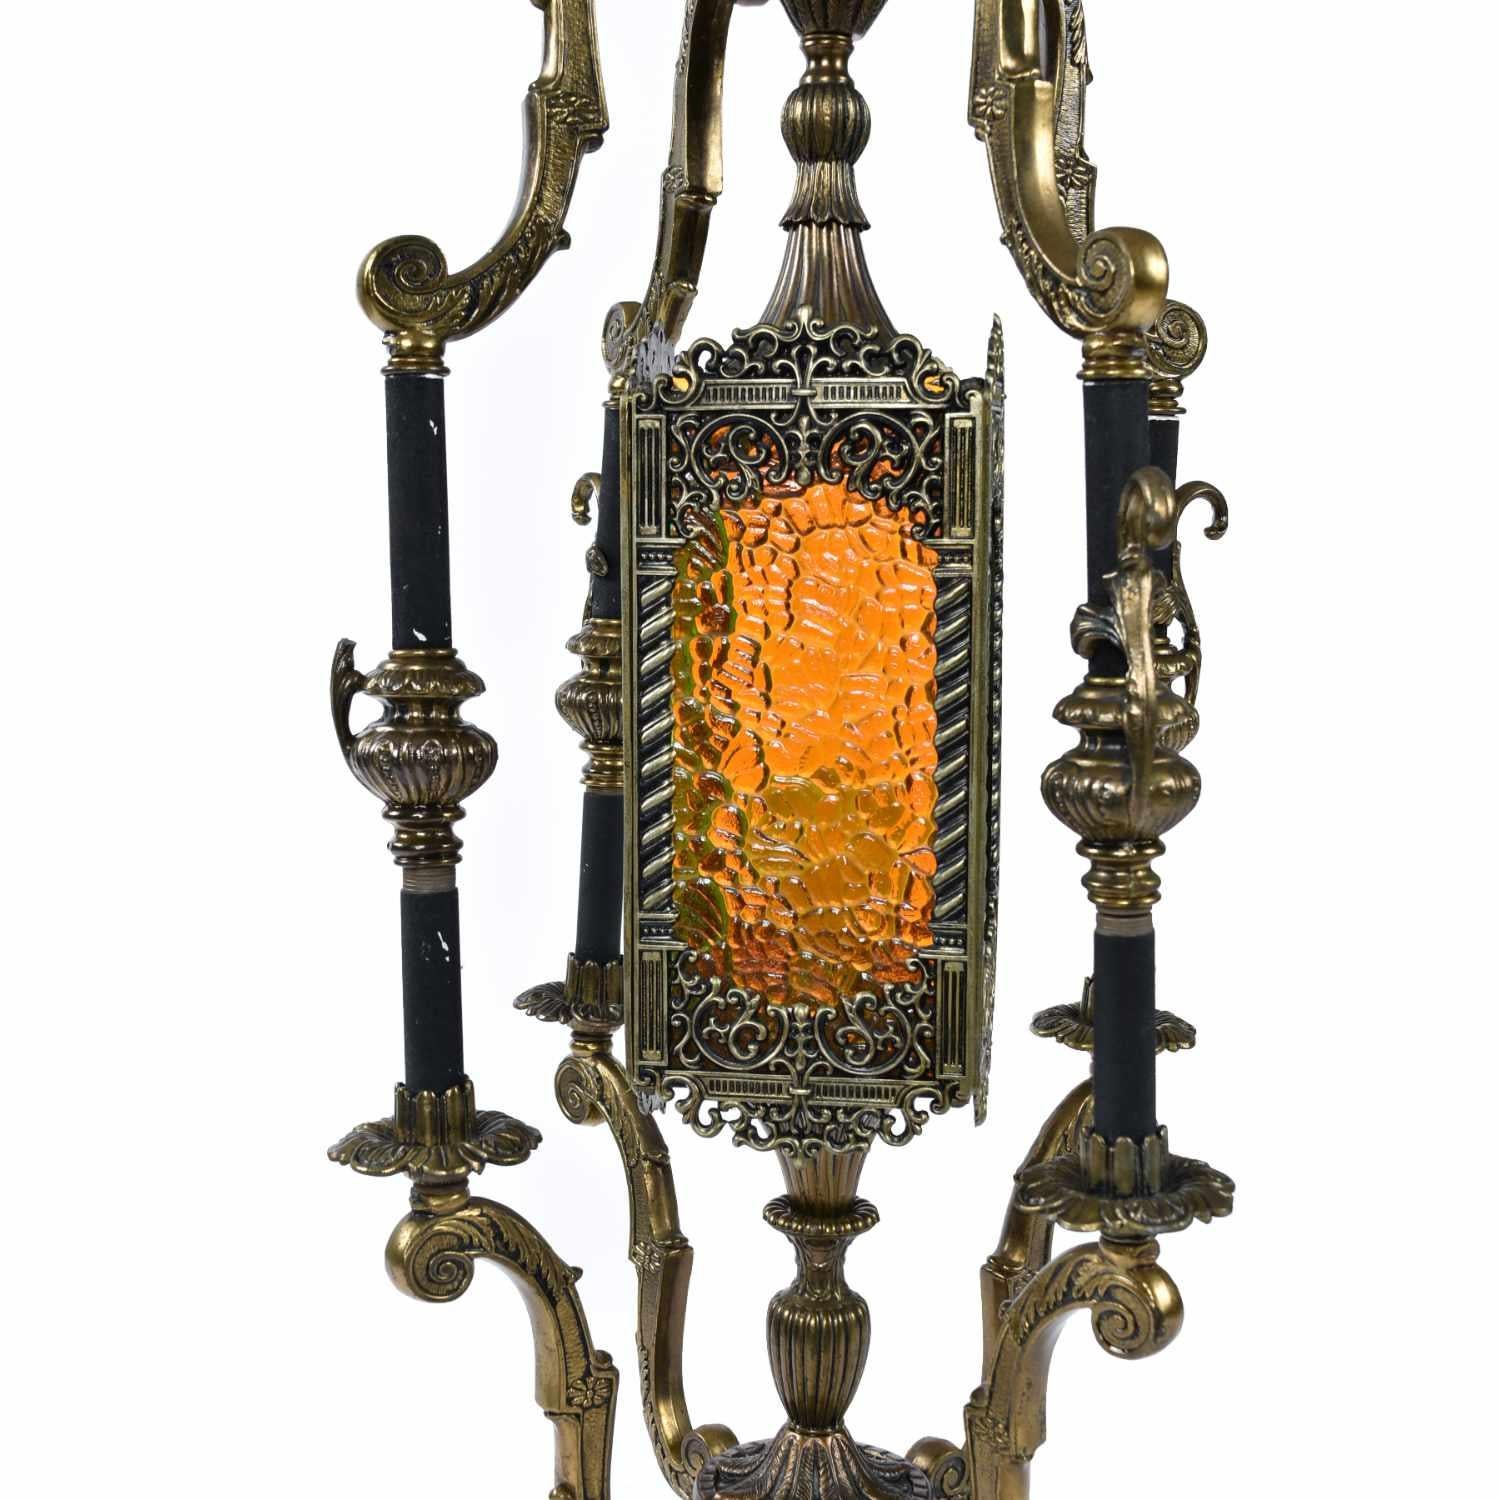 Vintage Gothic Baroque Metal Table Lamp with Orange and Green Stained Glass 1